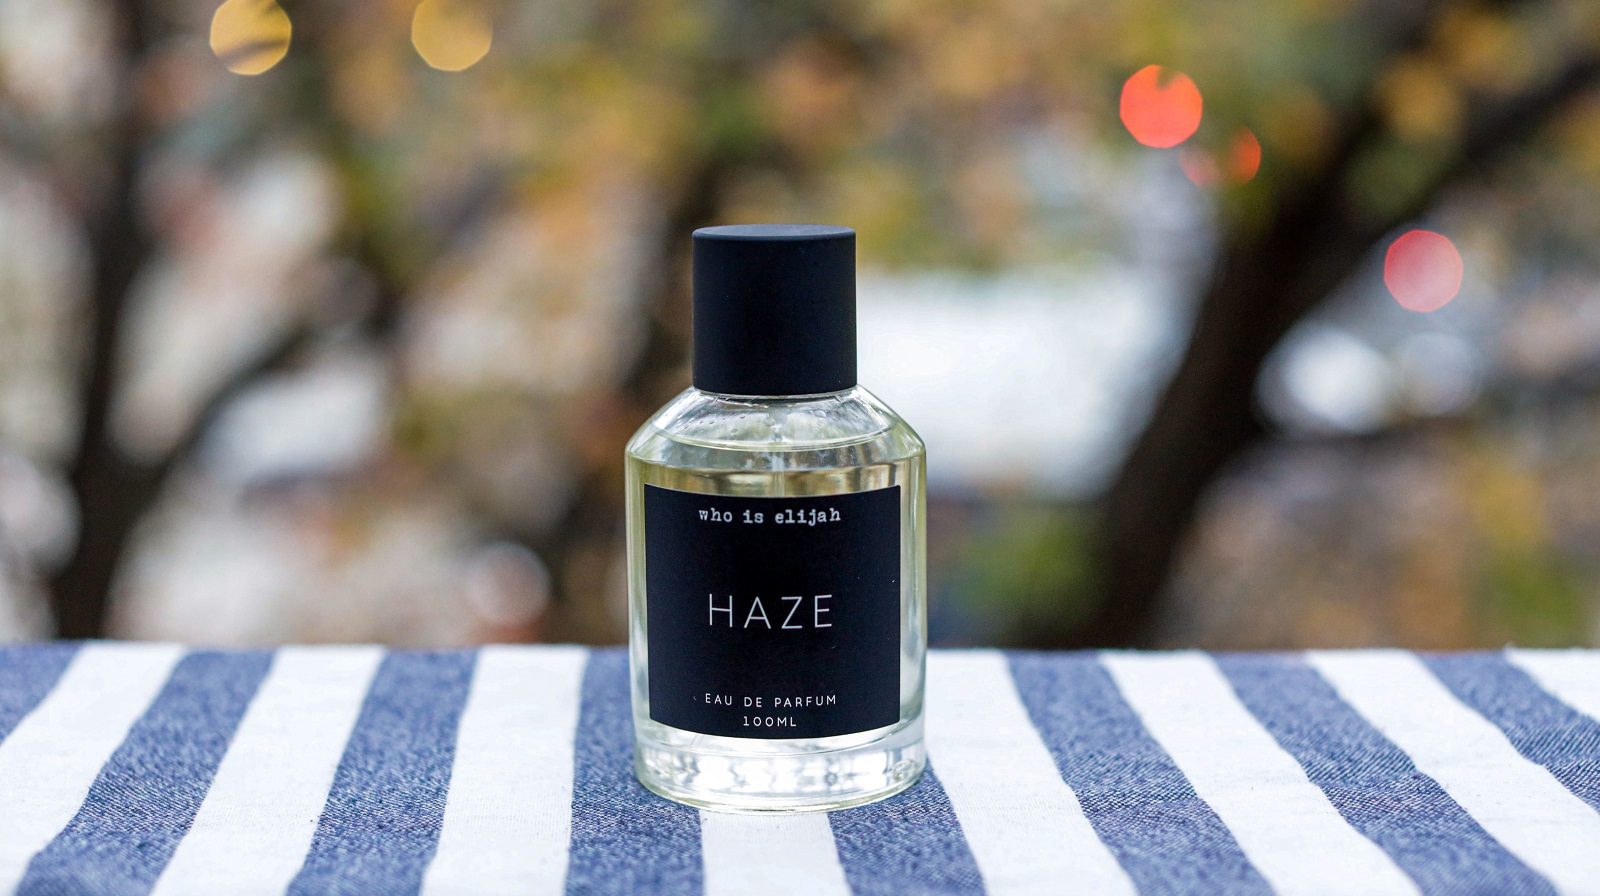 Who Is Elijah Haze Is A Heavily Smoked Winter Scent For Whisky Lovers